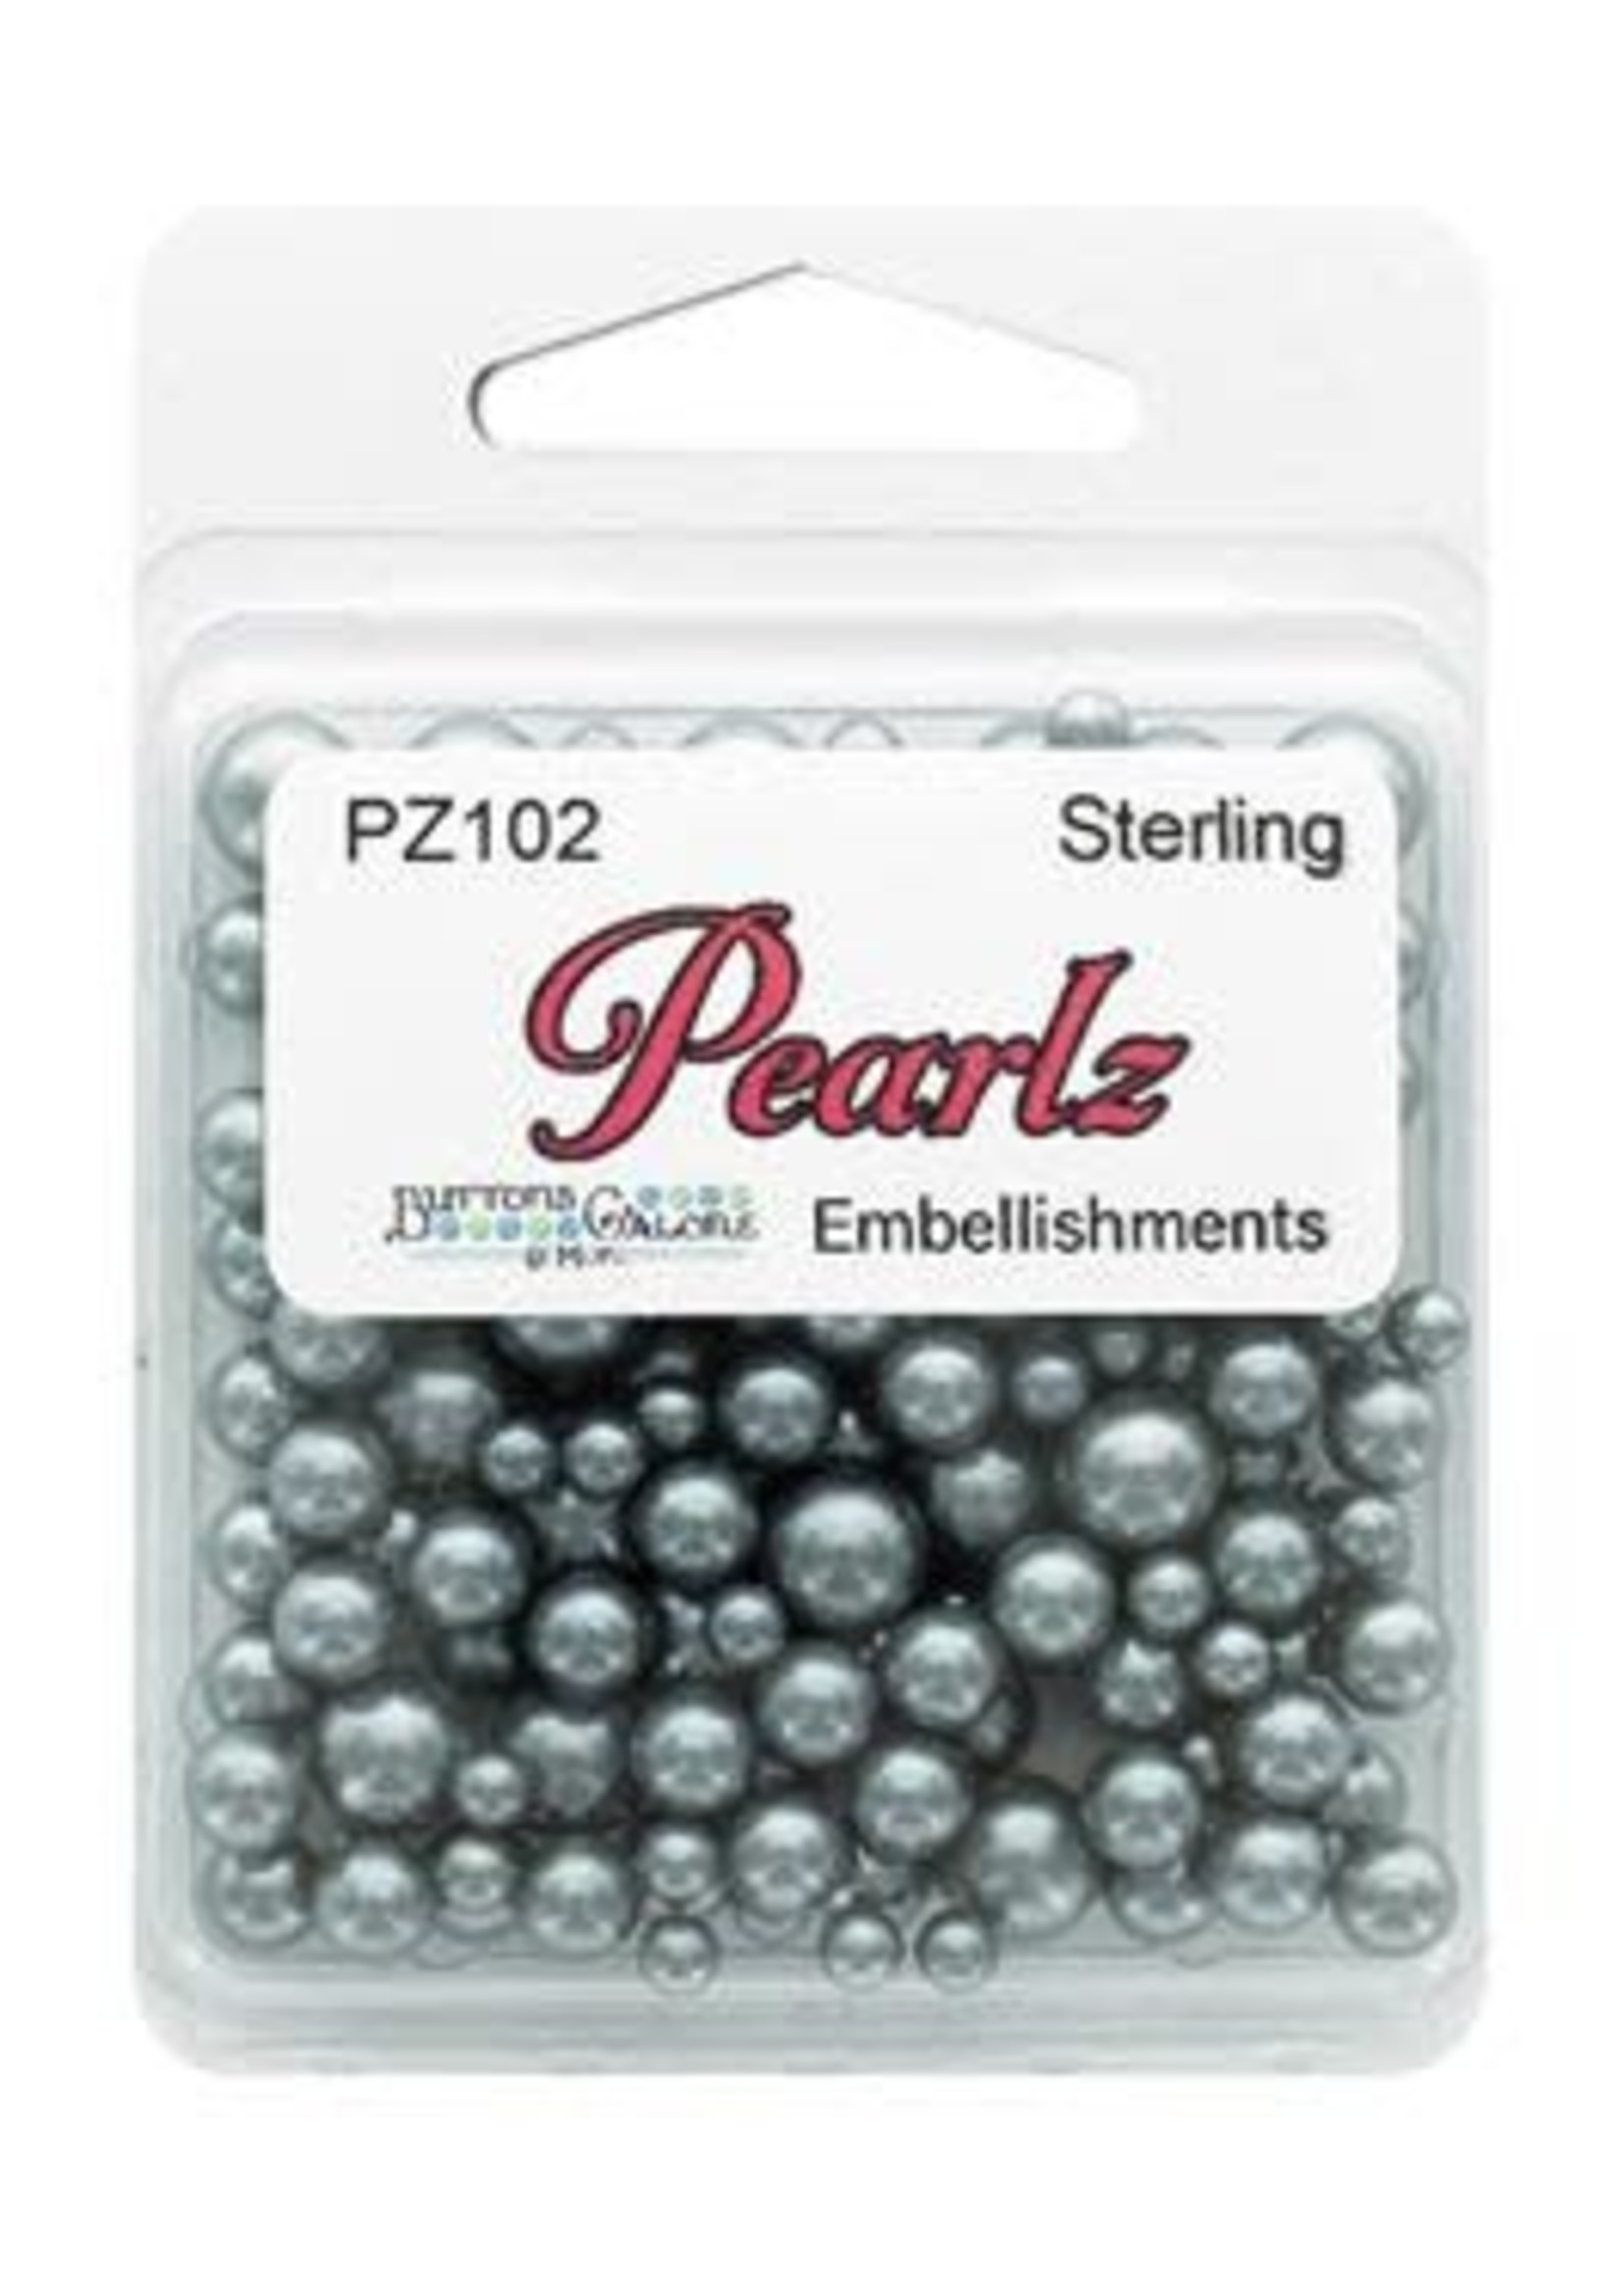 Buttons Galore Embellishments Pearlz Sterling